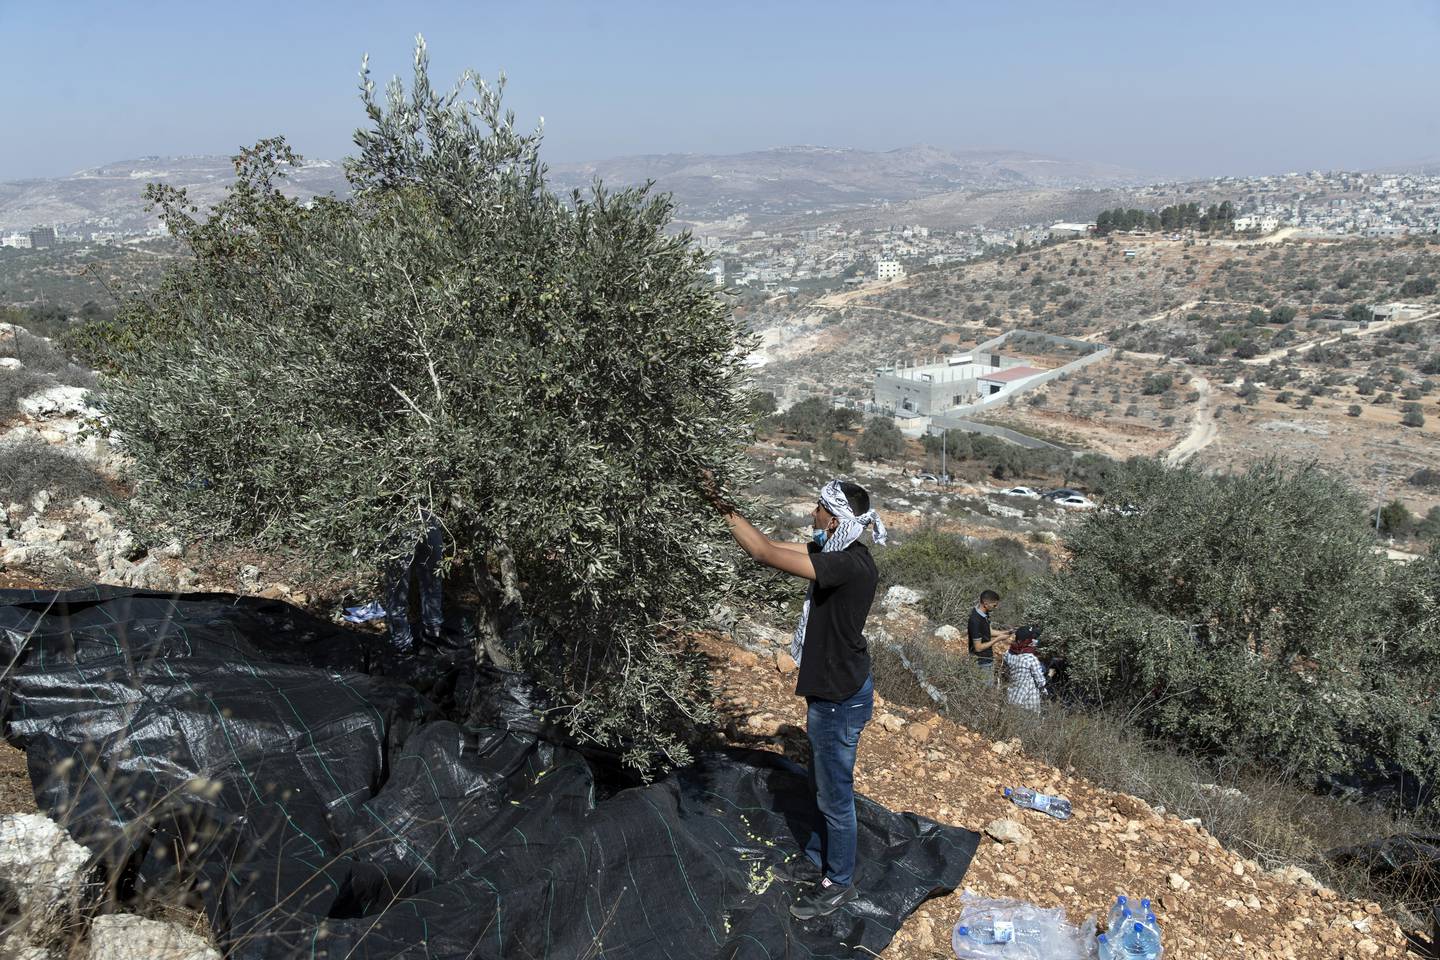 Volunteers harvest olive trees during a Palestinian Authority campaign to help farmers targeting Palestinian lands that are adjacent to Israeli settlements and outposts, during the olive harvest season, in the West Bank village of Beita, east of Nablus, Sunday, Oct. 10, 2021. (AP Photo/Nasser Nasser)